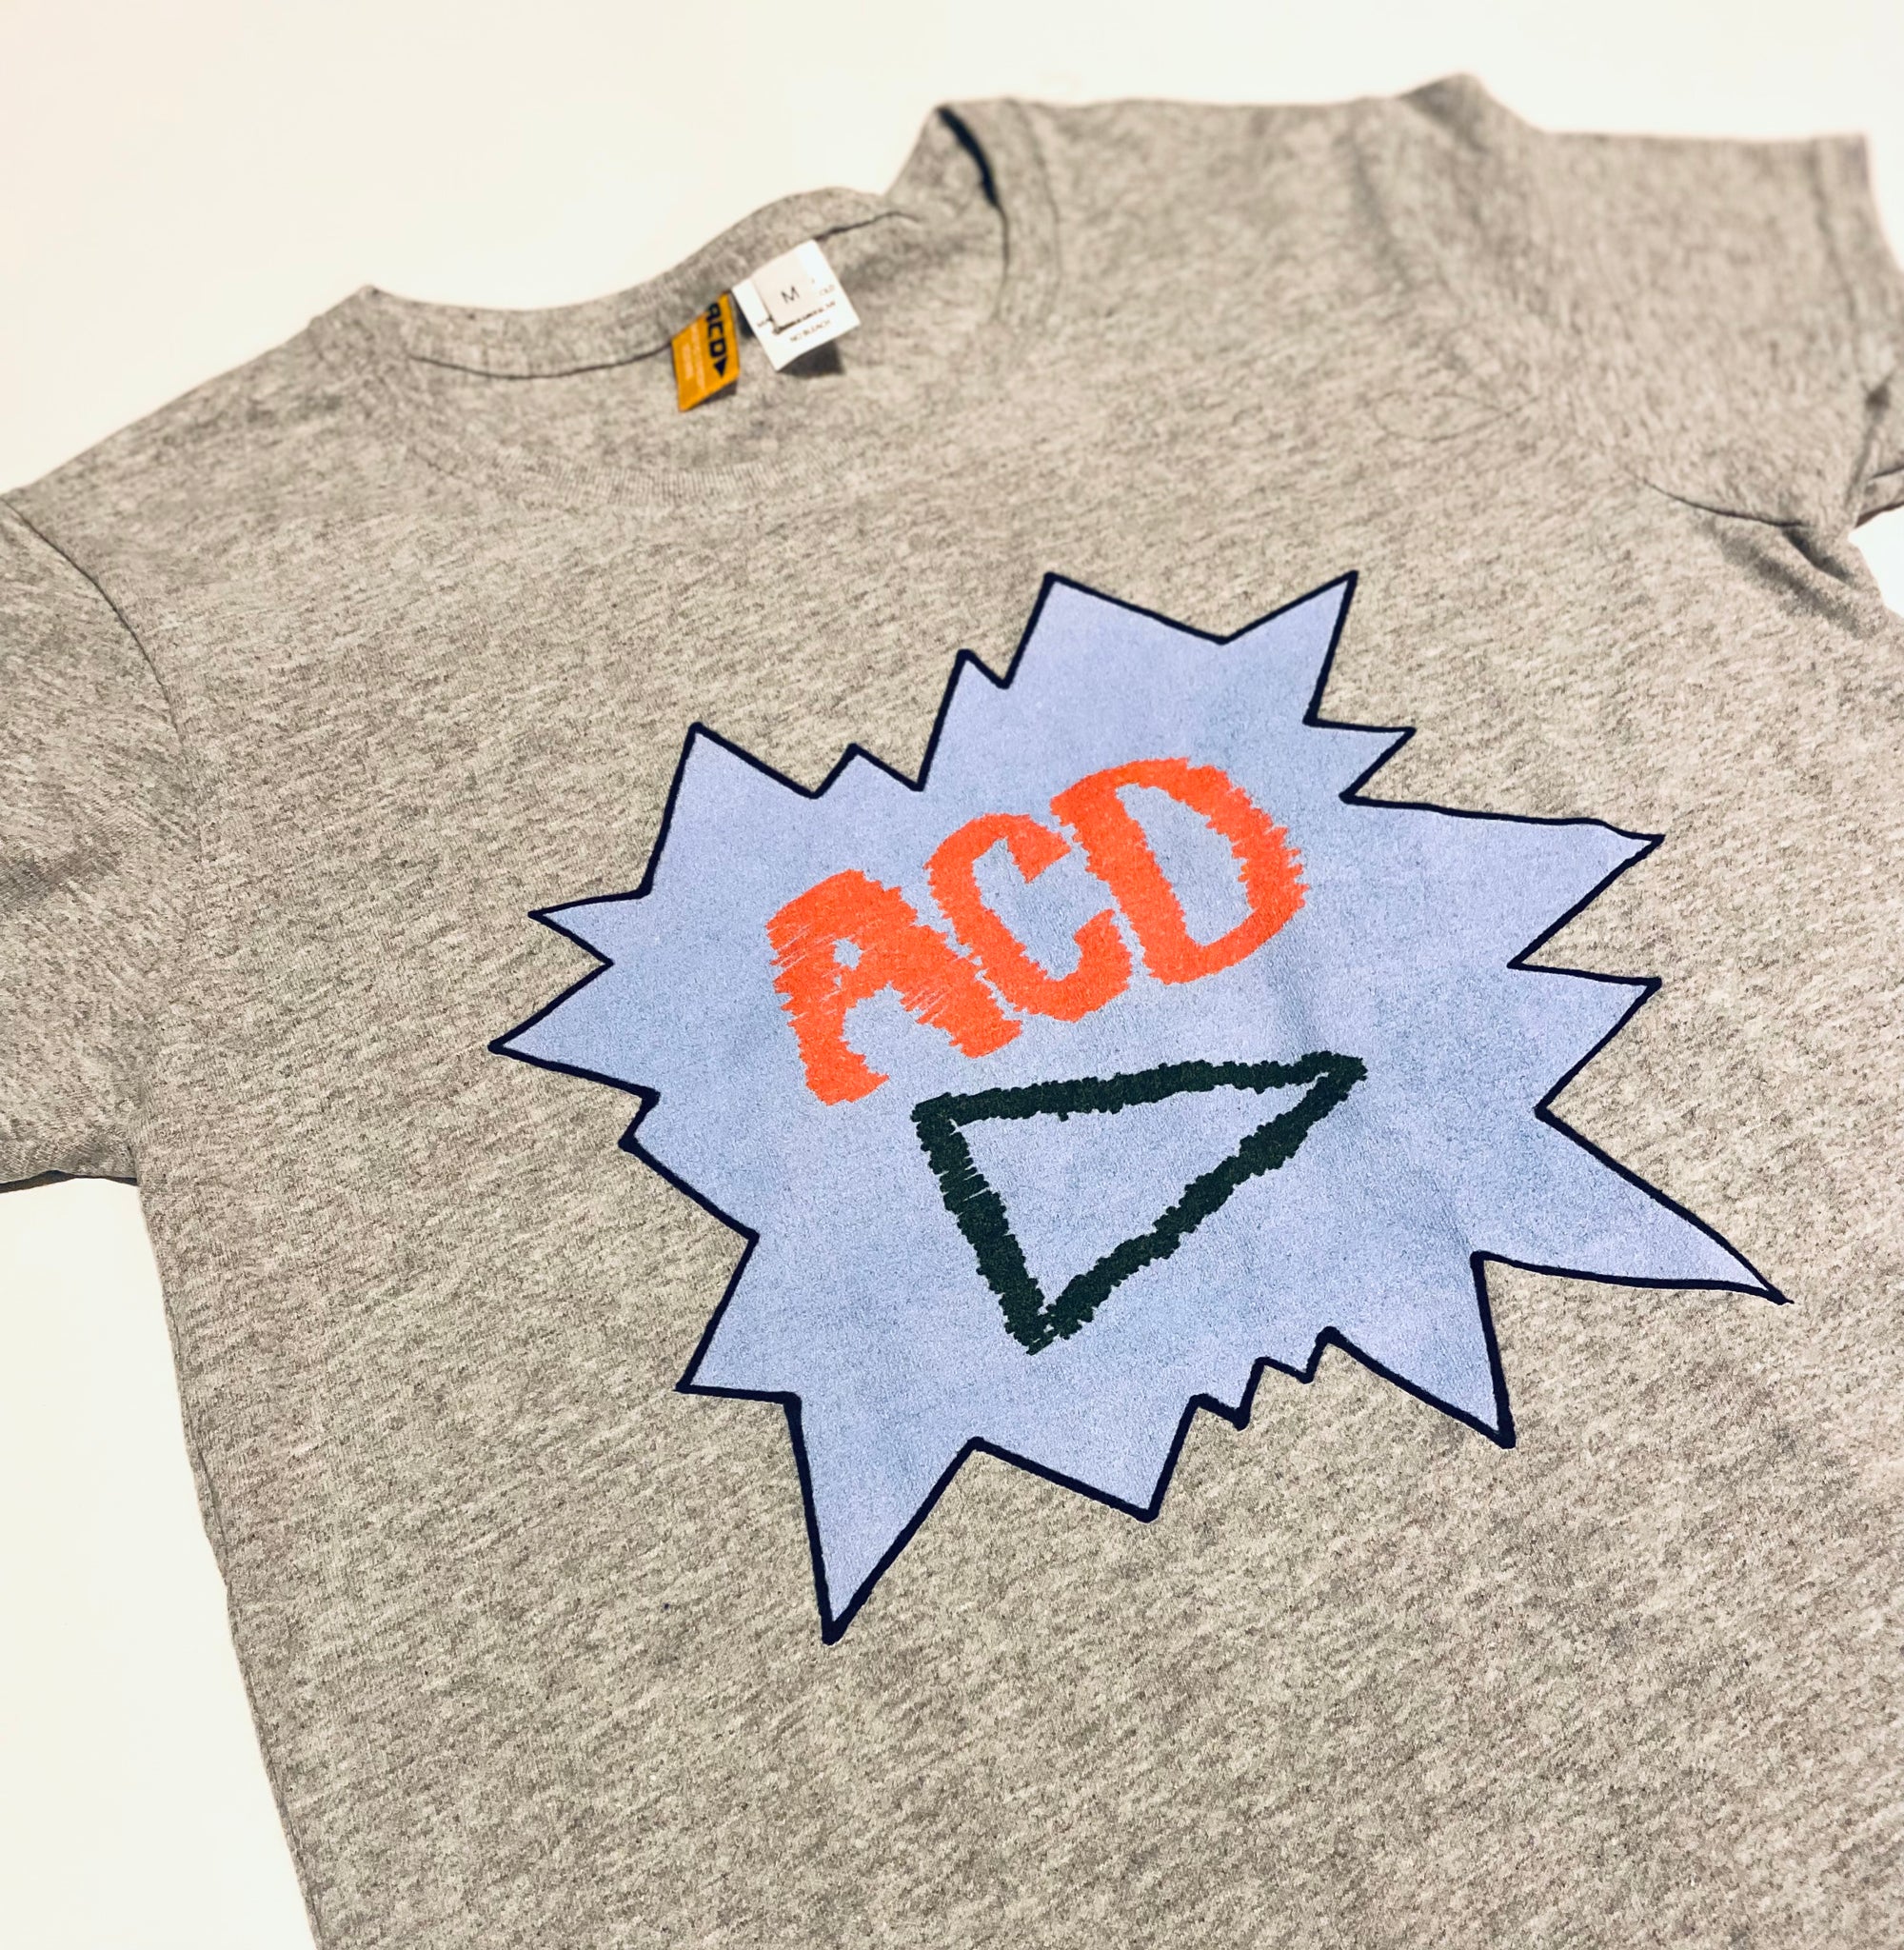 ACTION PRINT GRAPHIC TEE